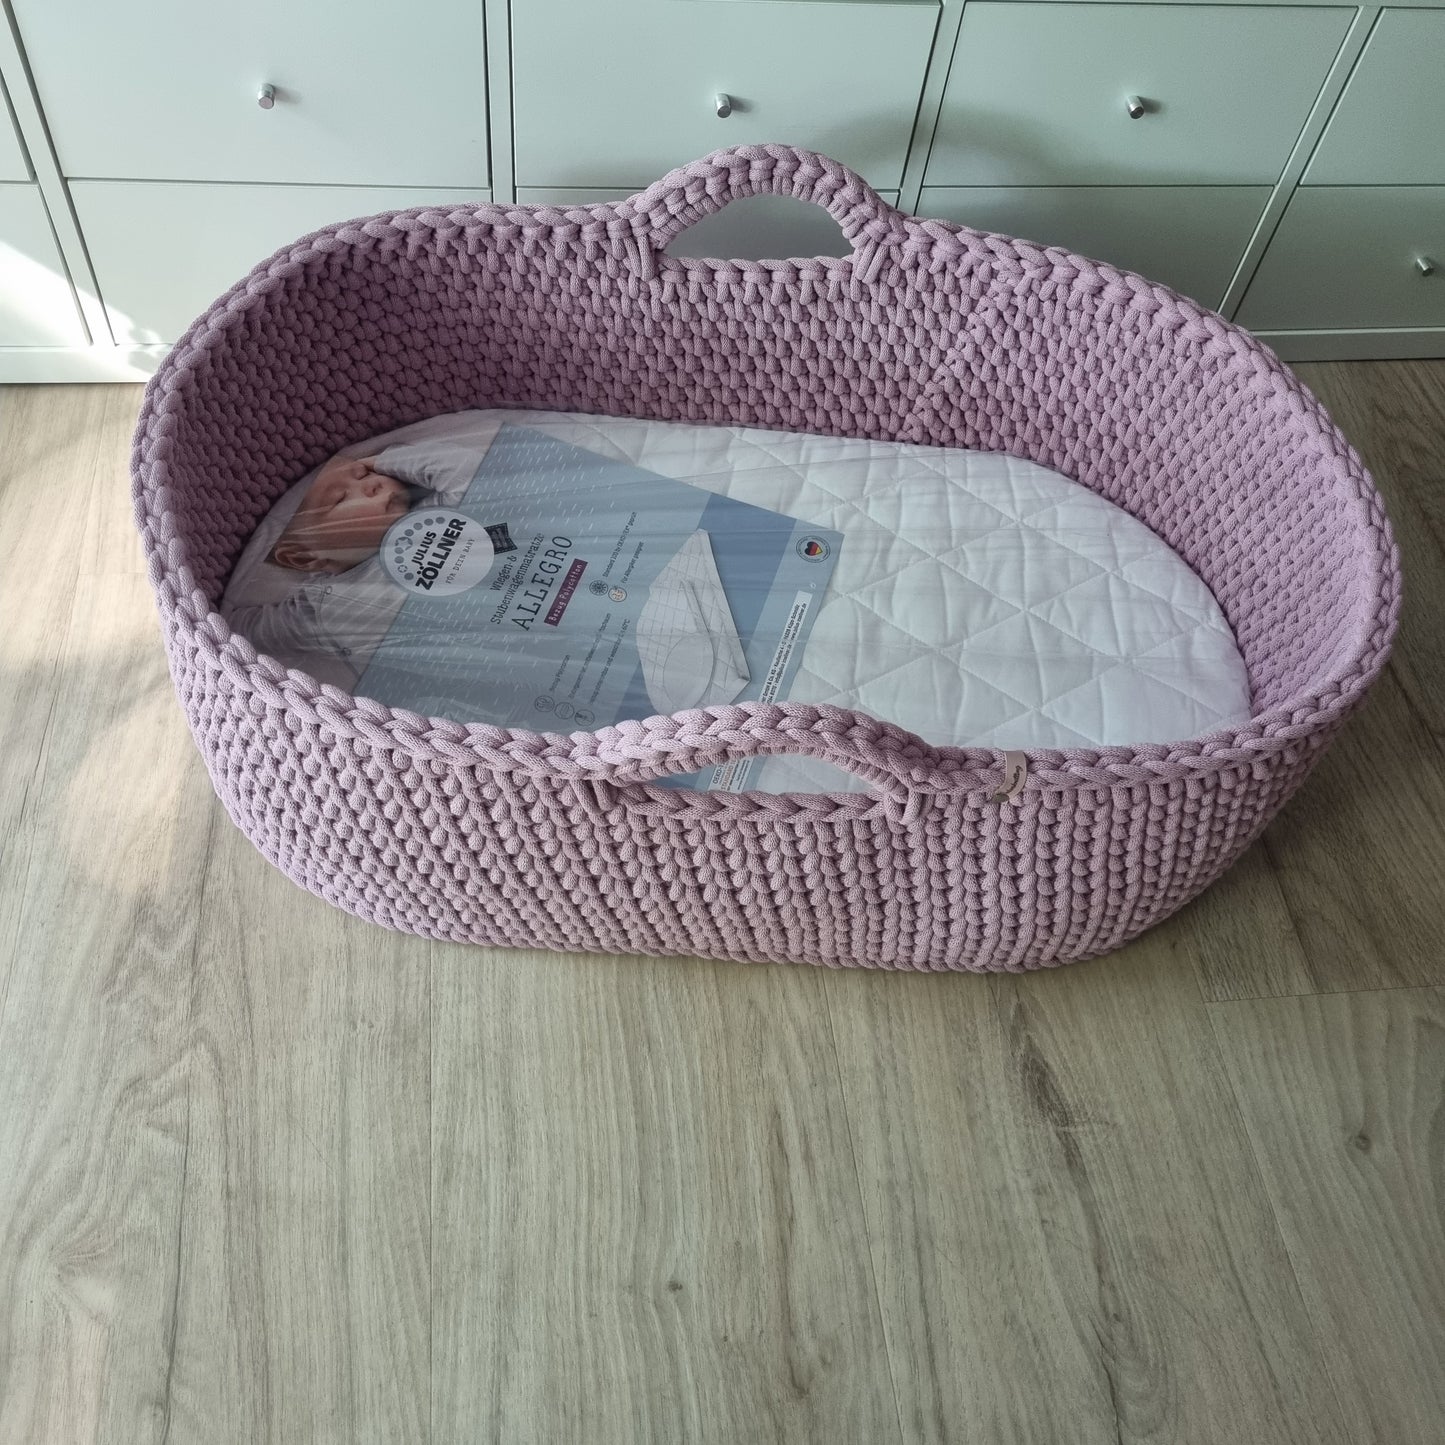 Moses basket baby cradle crocheted from Oeko-Tex cotton